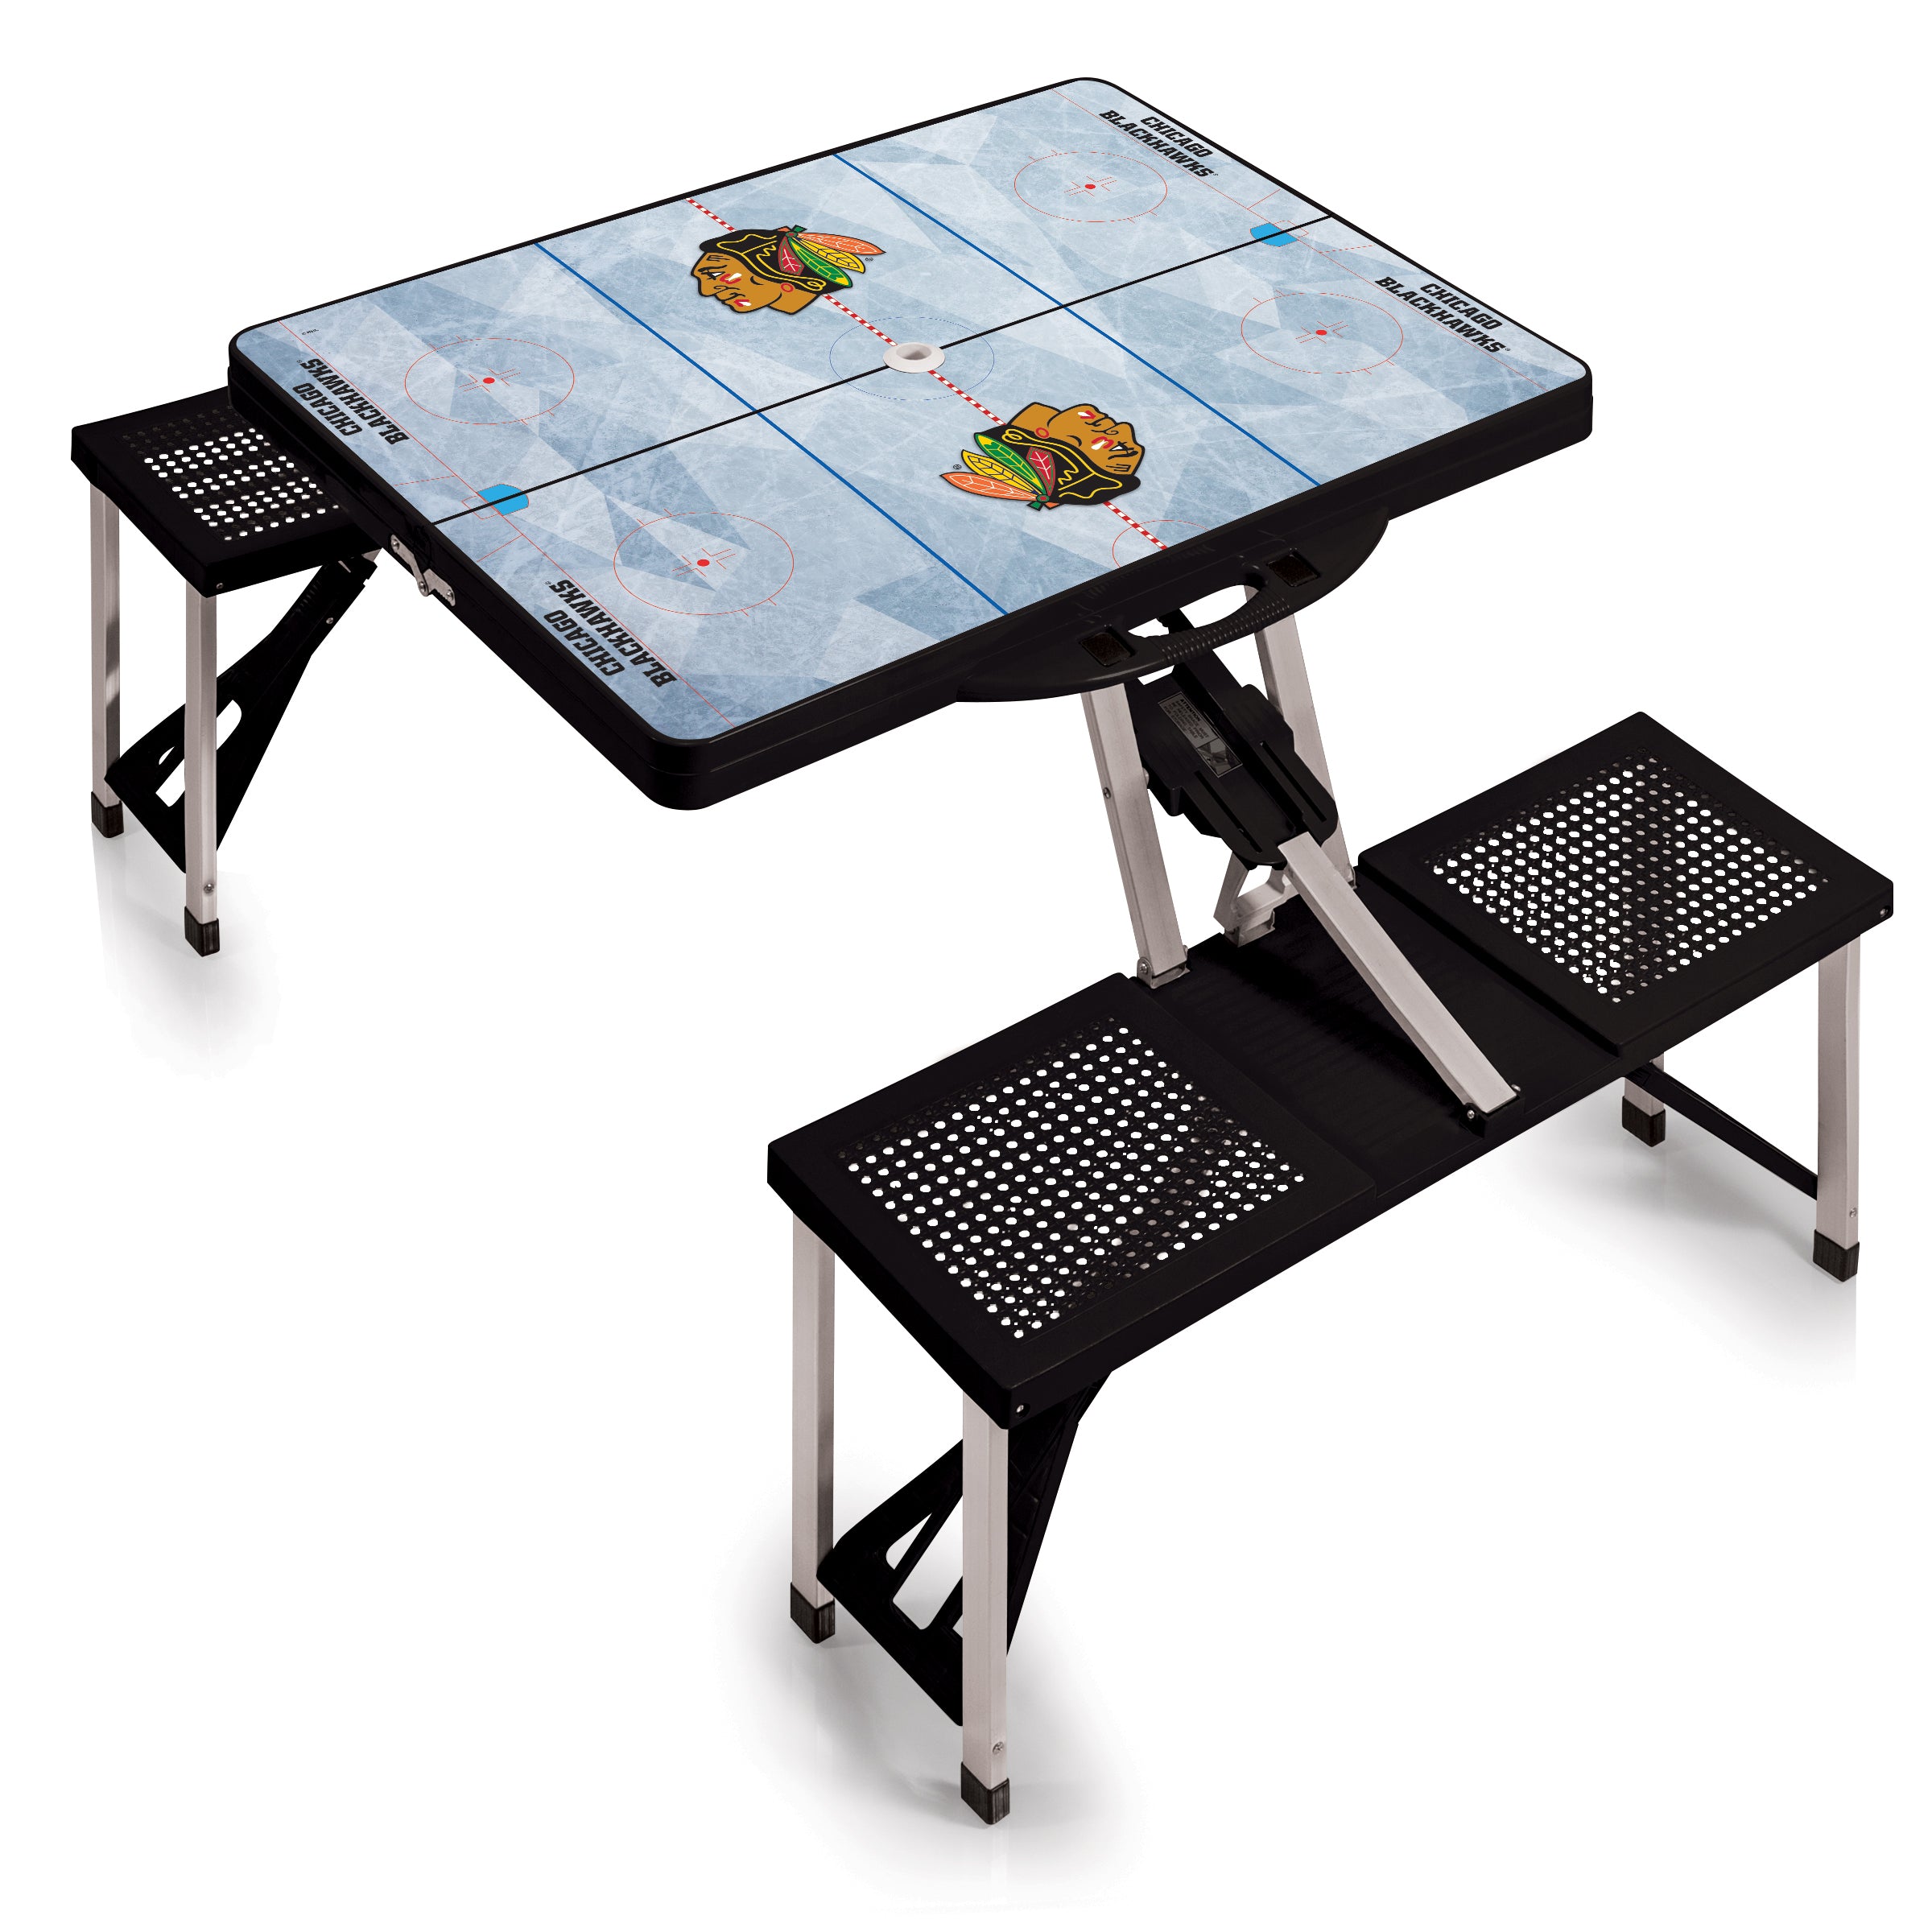 Hockey Rink - Chicago Blackhawks - Picnic Table Portable Folding Table with Seats